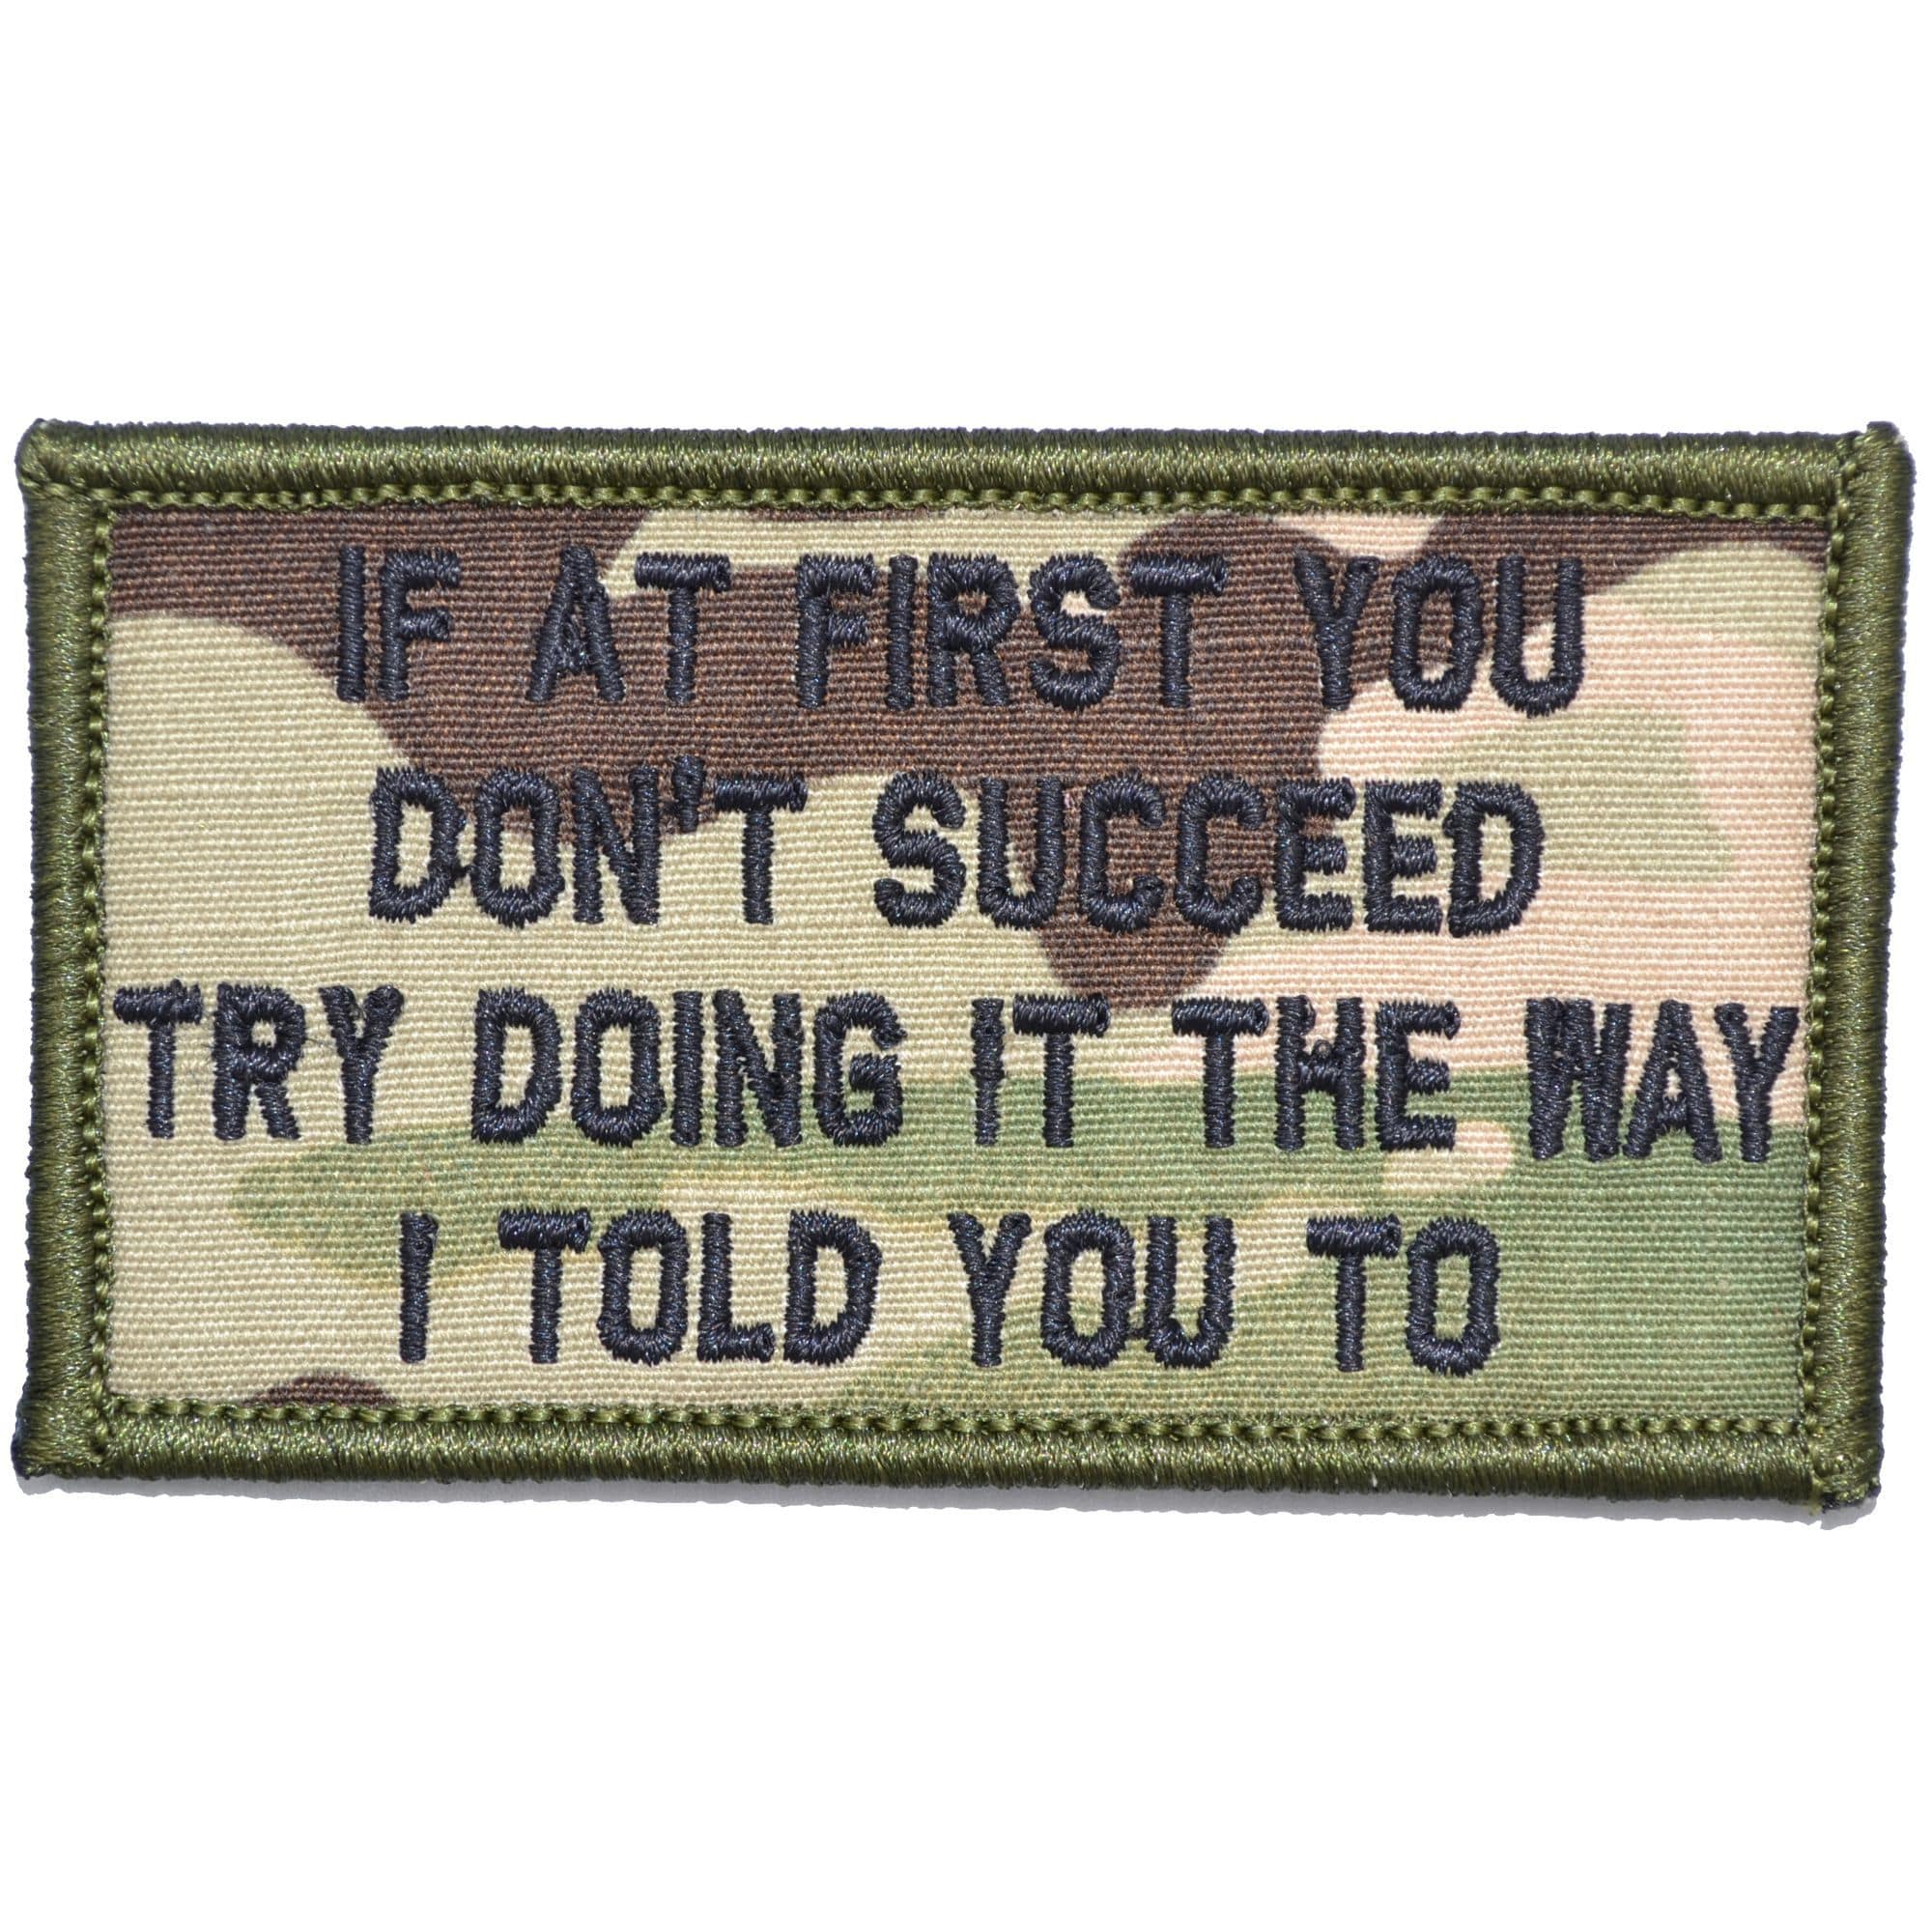 Tactical Gear Junkie Patches MultiCam If At First You Don't Succeed, Try Doing It The Way I Told You To - 2x3.5 Patch